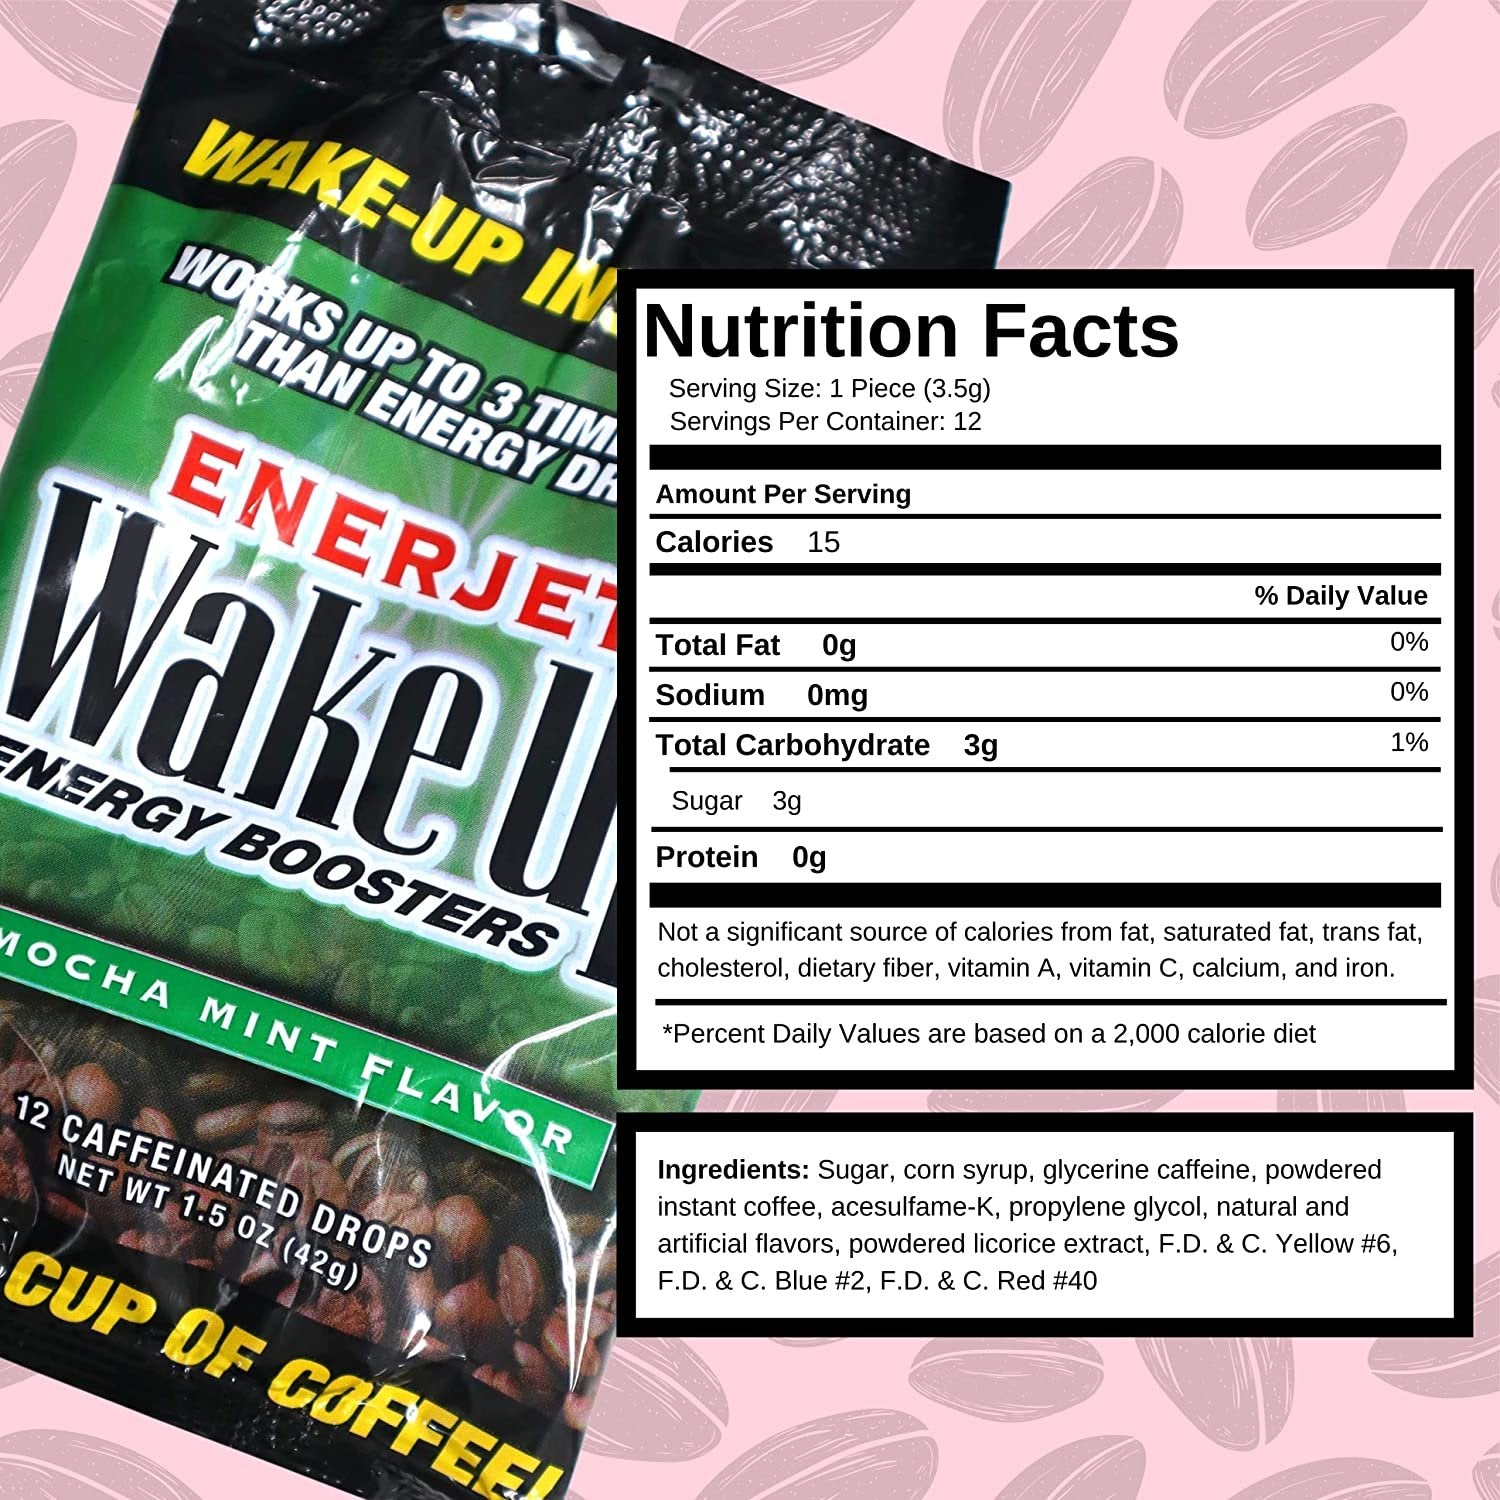 Enerjets Wake Up Energy Booster Caffeinated Drops - Instant Coffee Energy Supplements - Mocha Mint Flavor - Pack of 12, 12 Drops Per Package with Worldwide Nutrition Multi Purpose Key Chain